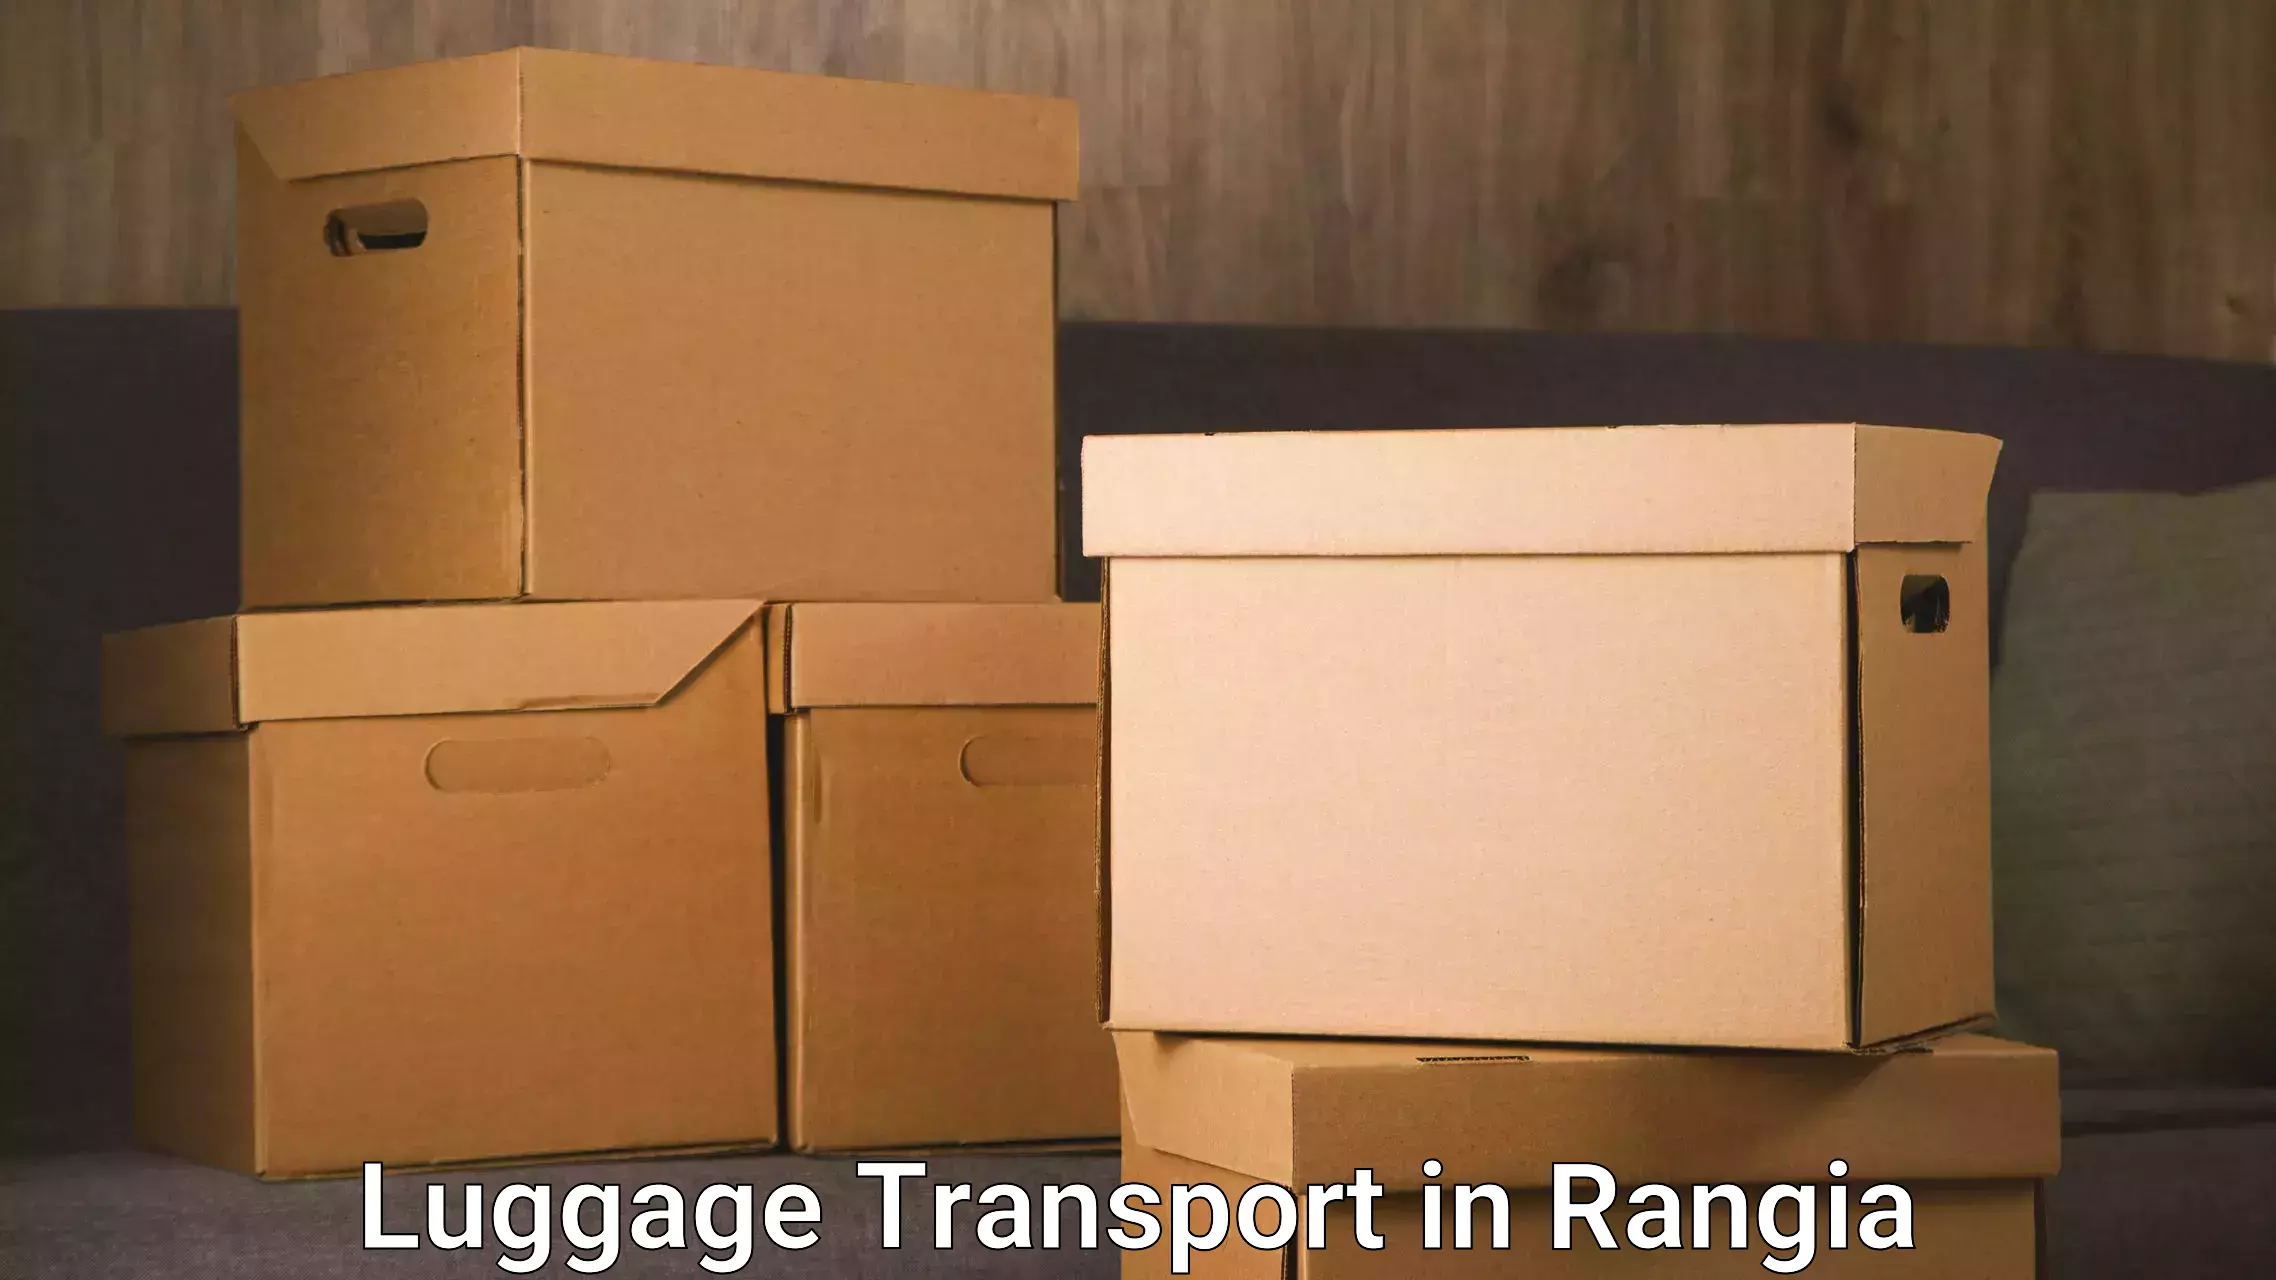 Instant baggage transport quote in Rangia